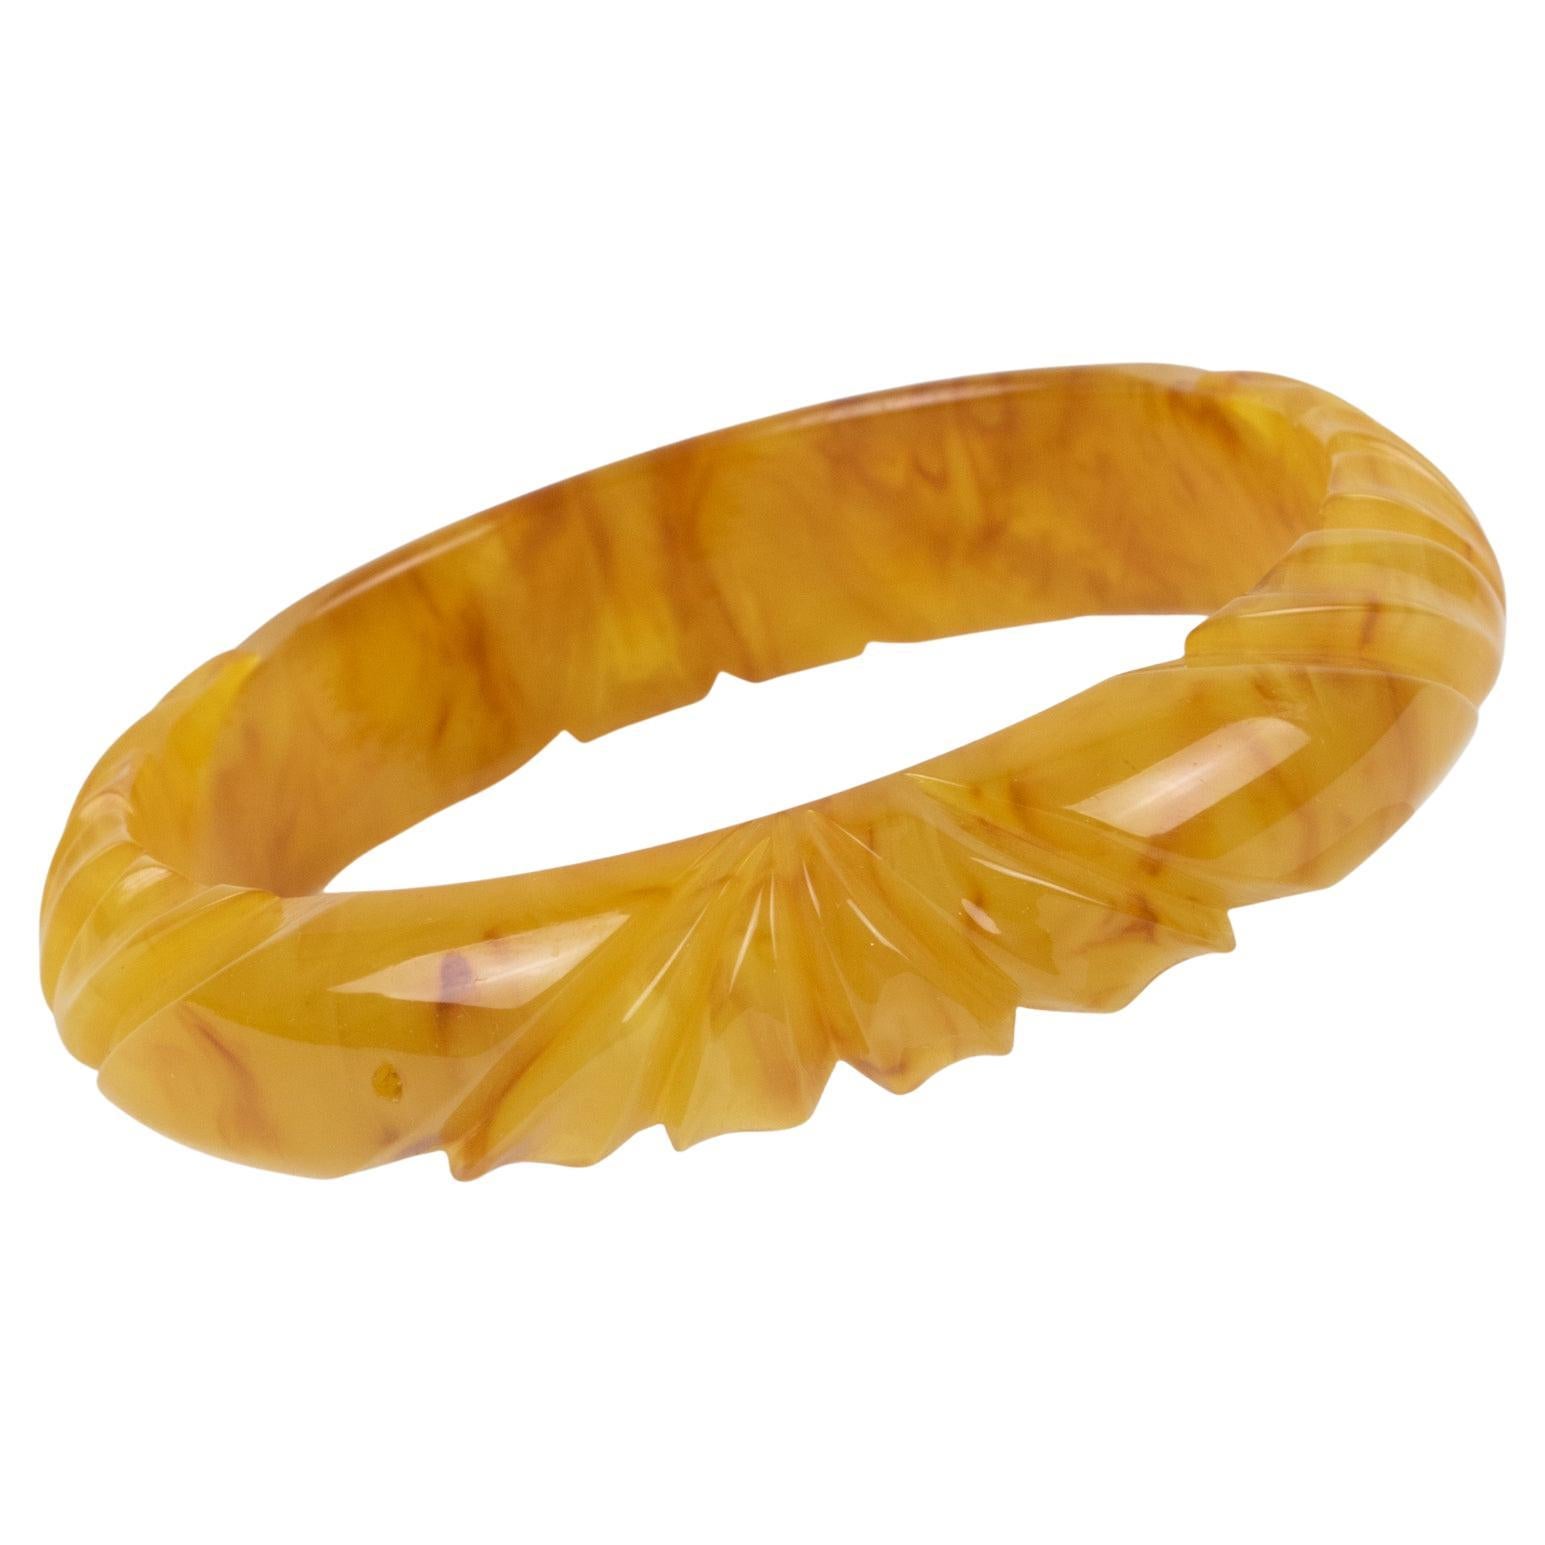 Bakelite Carved Bracelet Bangle Yellow Egg Yolk and Red Wine Marble For Sale